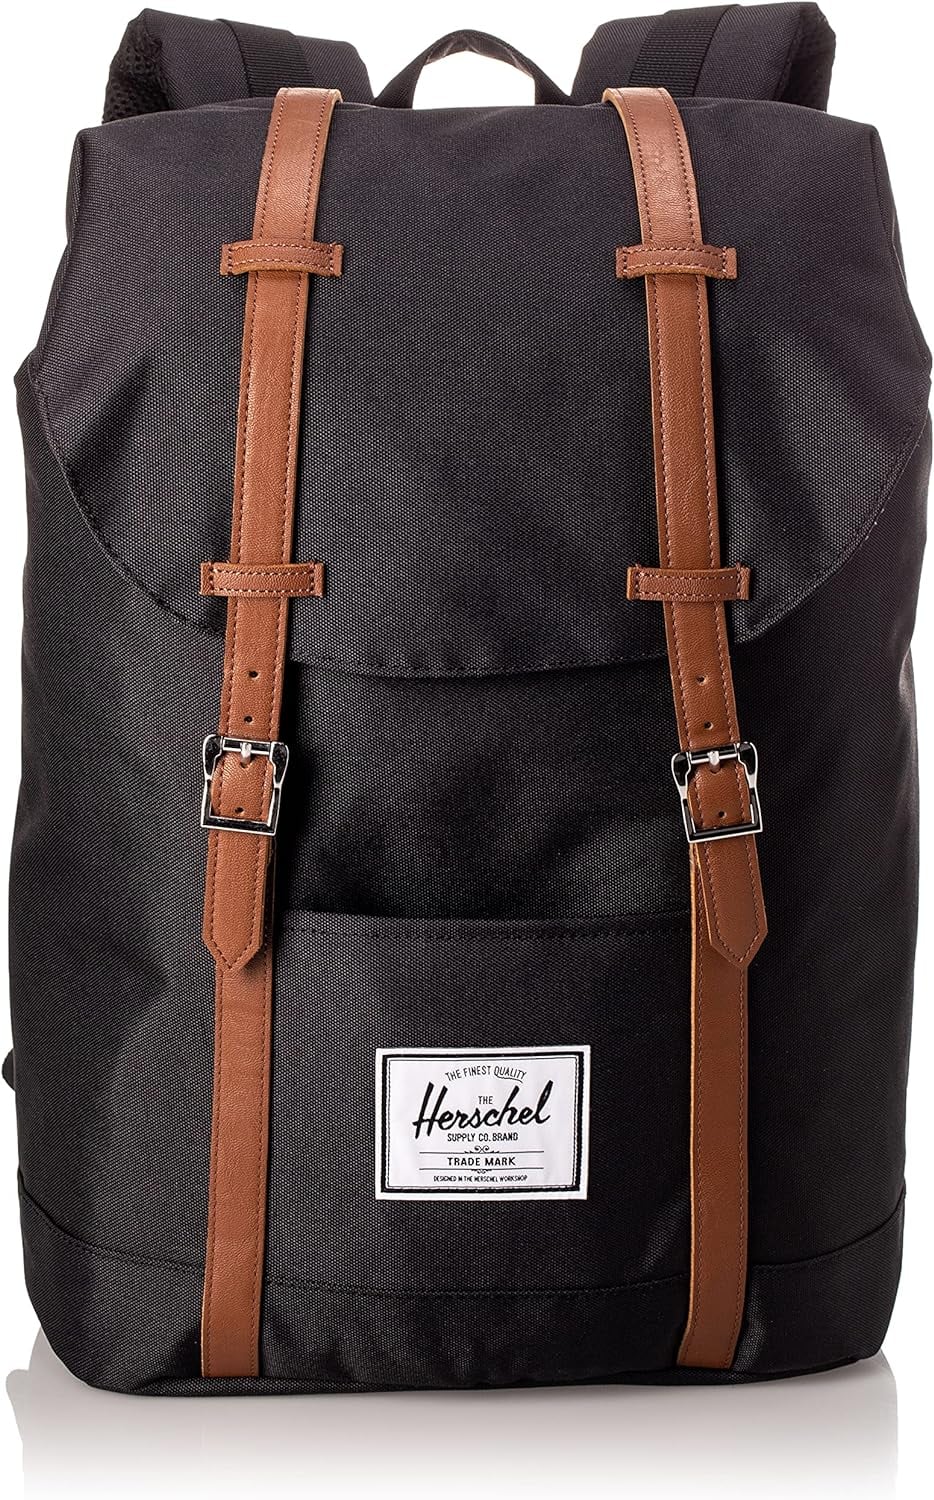 <p><a href="https://www.amazon.com/Herschel-Supply-Co-10066-00001-OS-Backpack-Black/dp/B00B2EDDKM?ref_=ast_sto_dp&th=1">BUY NOW</a></p><p>$75</p><p><a href="https://www.amazon.com/Herschel-Supply-Co-10066-00001-OS-Backpack-Black/dp/B00B2EDDKM?ref_=ast_sto_dp&th=1" class="ga-track"><strong>Herschel Retreat Backpack</strong></a> ($75, originally $100) </p><p>This backpack doesn't just look adventurous, but is purposely crafted for exploration. It has a spacious interior with a padded and fleece-lined laptop sleeve, a front storage pocket for small essentials you want quick access to, and padded shoulder straps. One shopper who rated it five stars wrote: "This backpack is awesome. I use it frequently when traveling, and it was an essential when hiking through Europe and Lebanon. It's very well-made, has excellent padding to keep my laptop safe, and I can fit a ton of stuff inside (basically everything for a day of hiking or as an overnight bag)."</p>